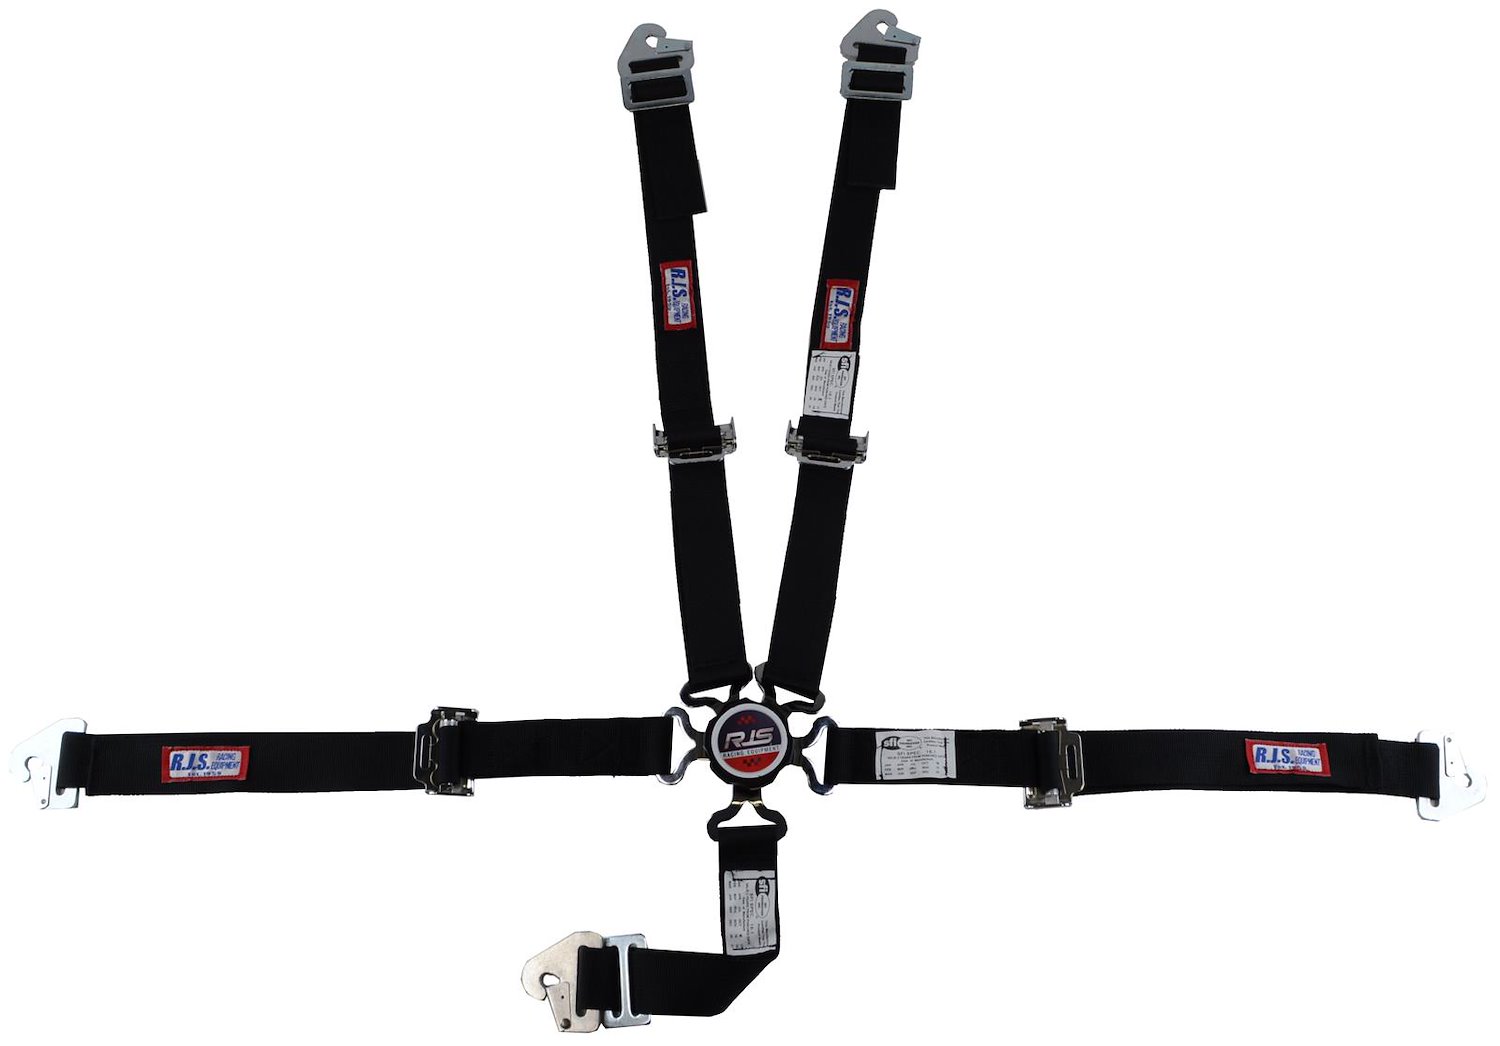 SFI 16.1 CAM-LOCK HARNESS 2 PULL DOWN Lap Belt 2 Shoulder Harness Individual FLOOR Mount 2 DOUBLESub ALL WRAP/BOLT ENDS YELLOW